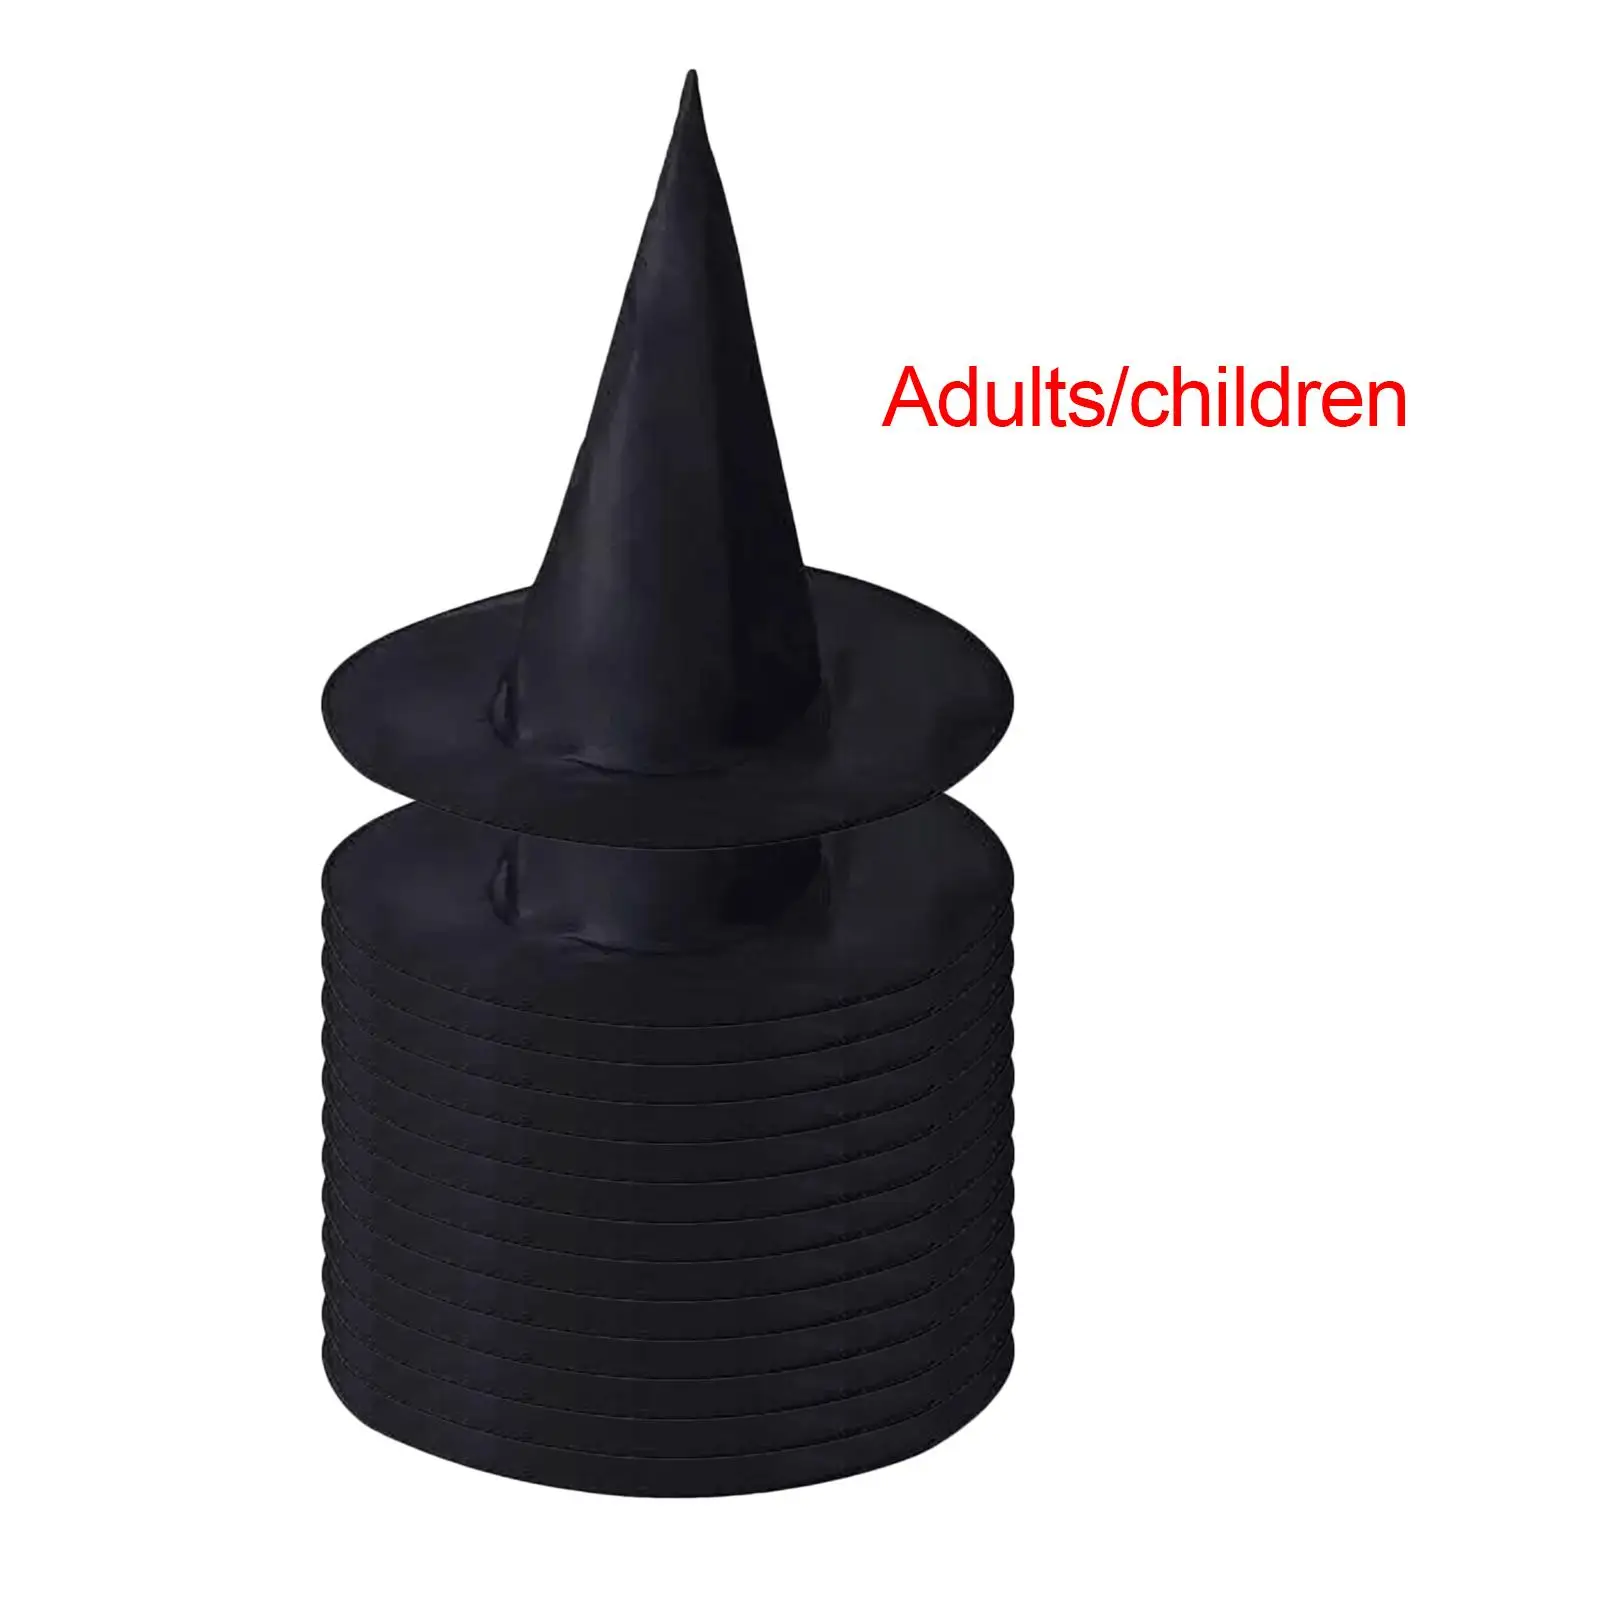 14x Pointed Halloween Witch Hats Cosplay for Party Favors Photo Props Decor